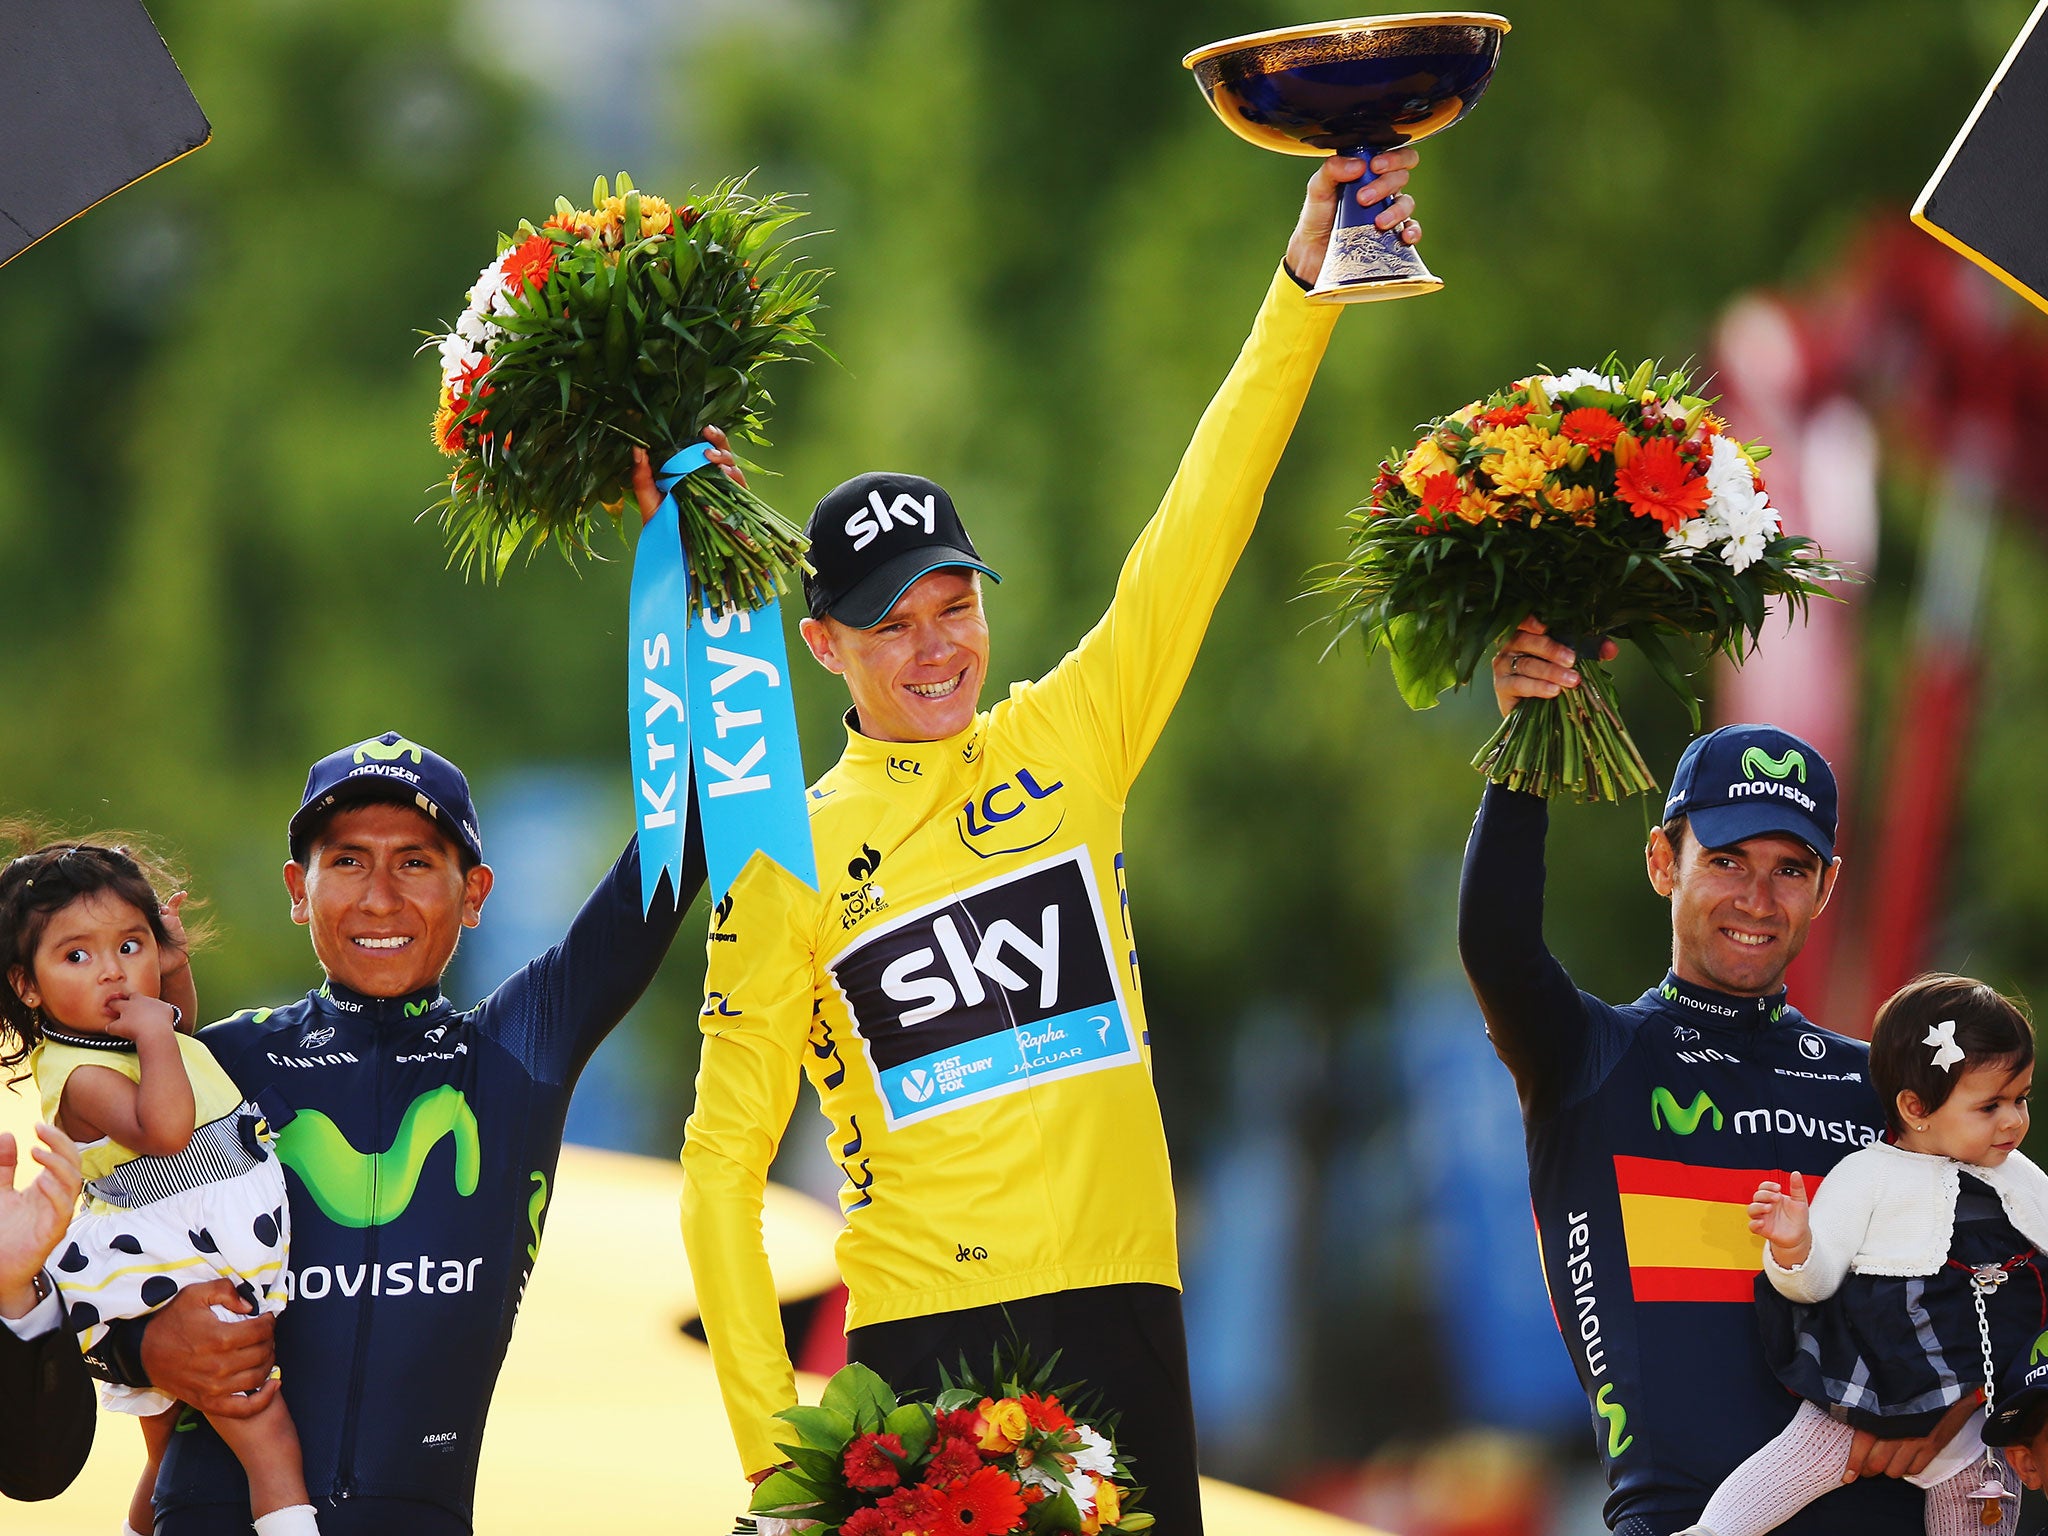 Tour de France winner Chris Froome, centre, celebrates alongside second placed Nairo Quintana, left, of Colombia and third placed Alejandro Valverde, right, of Spain